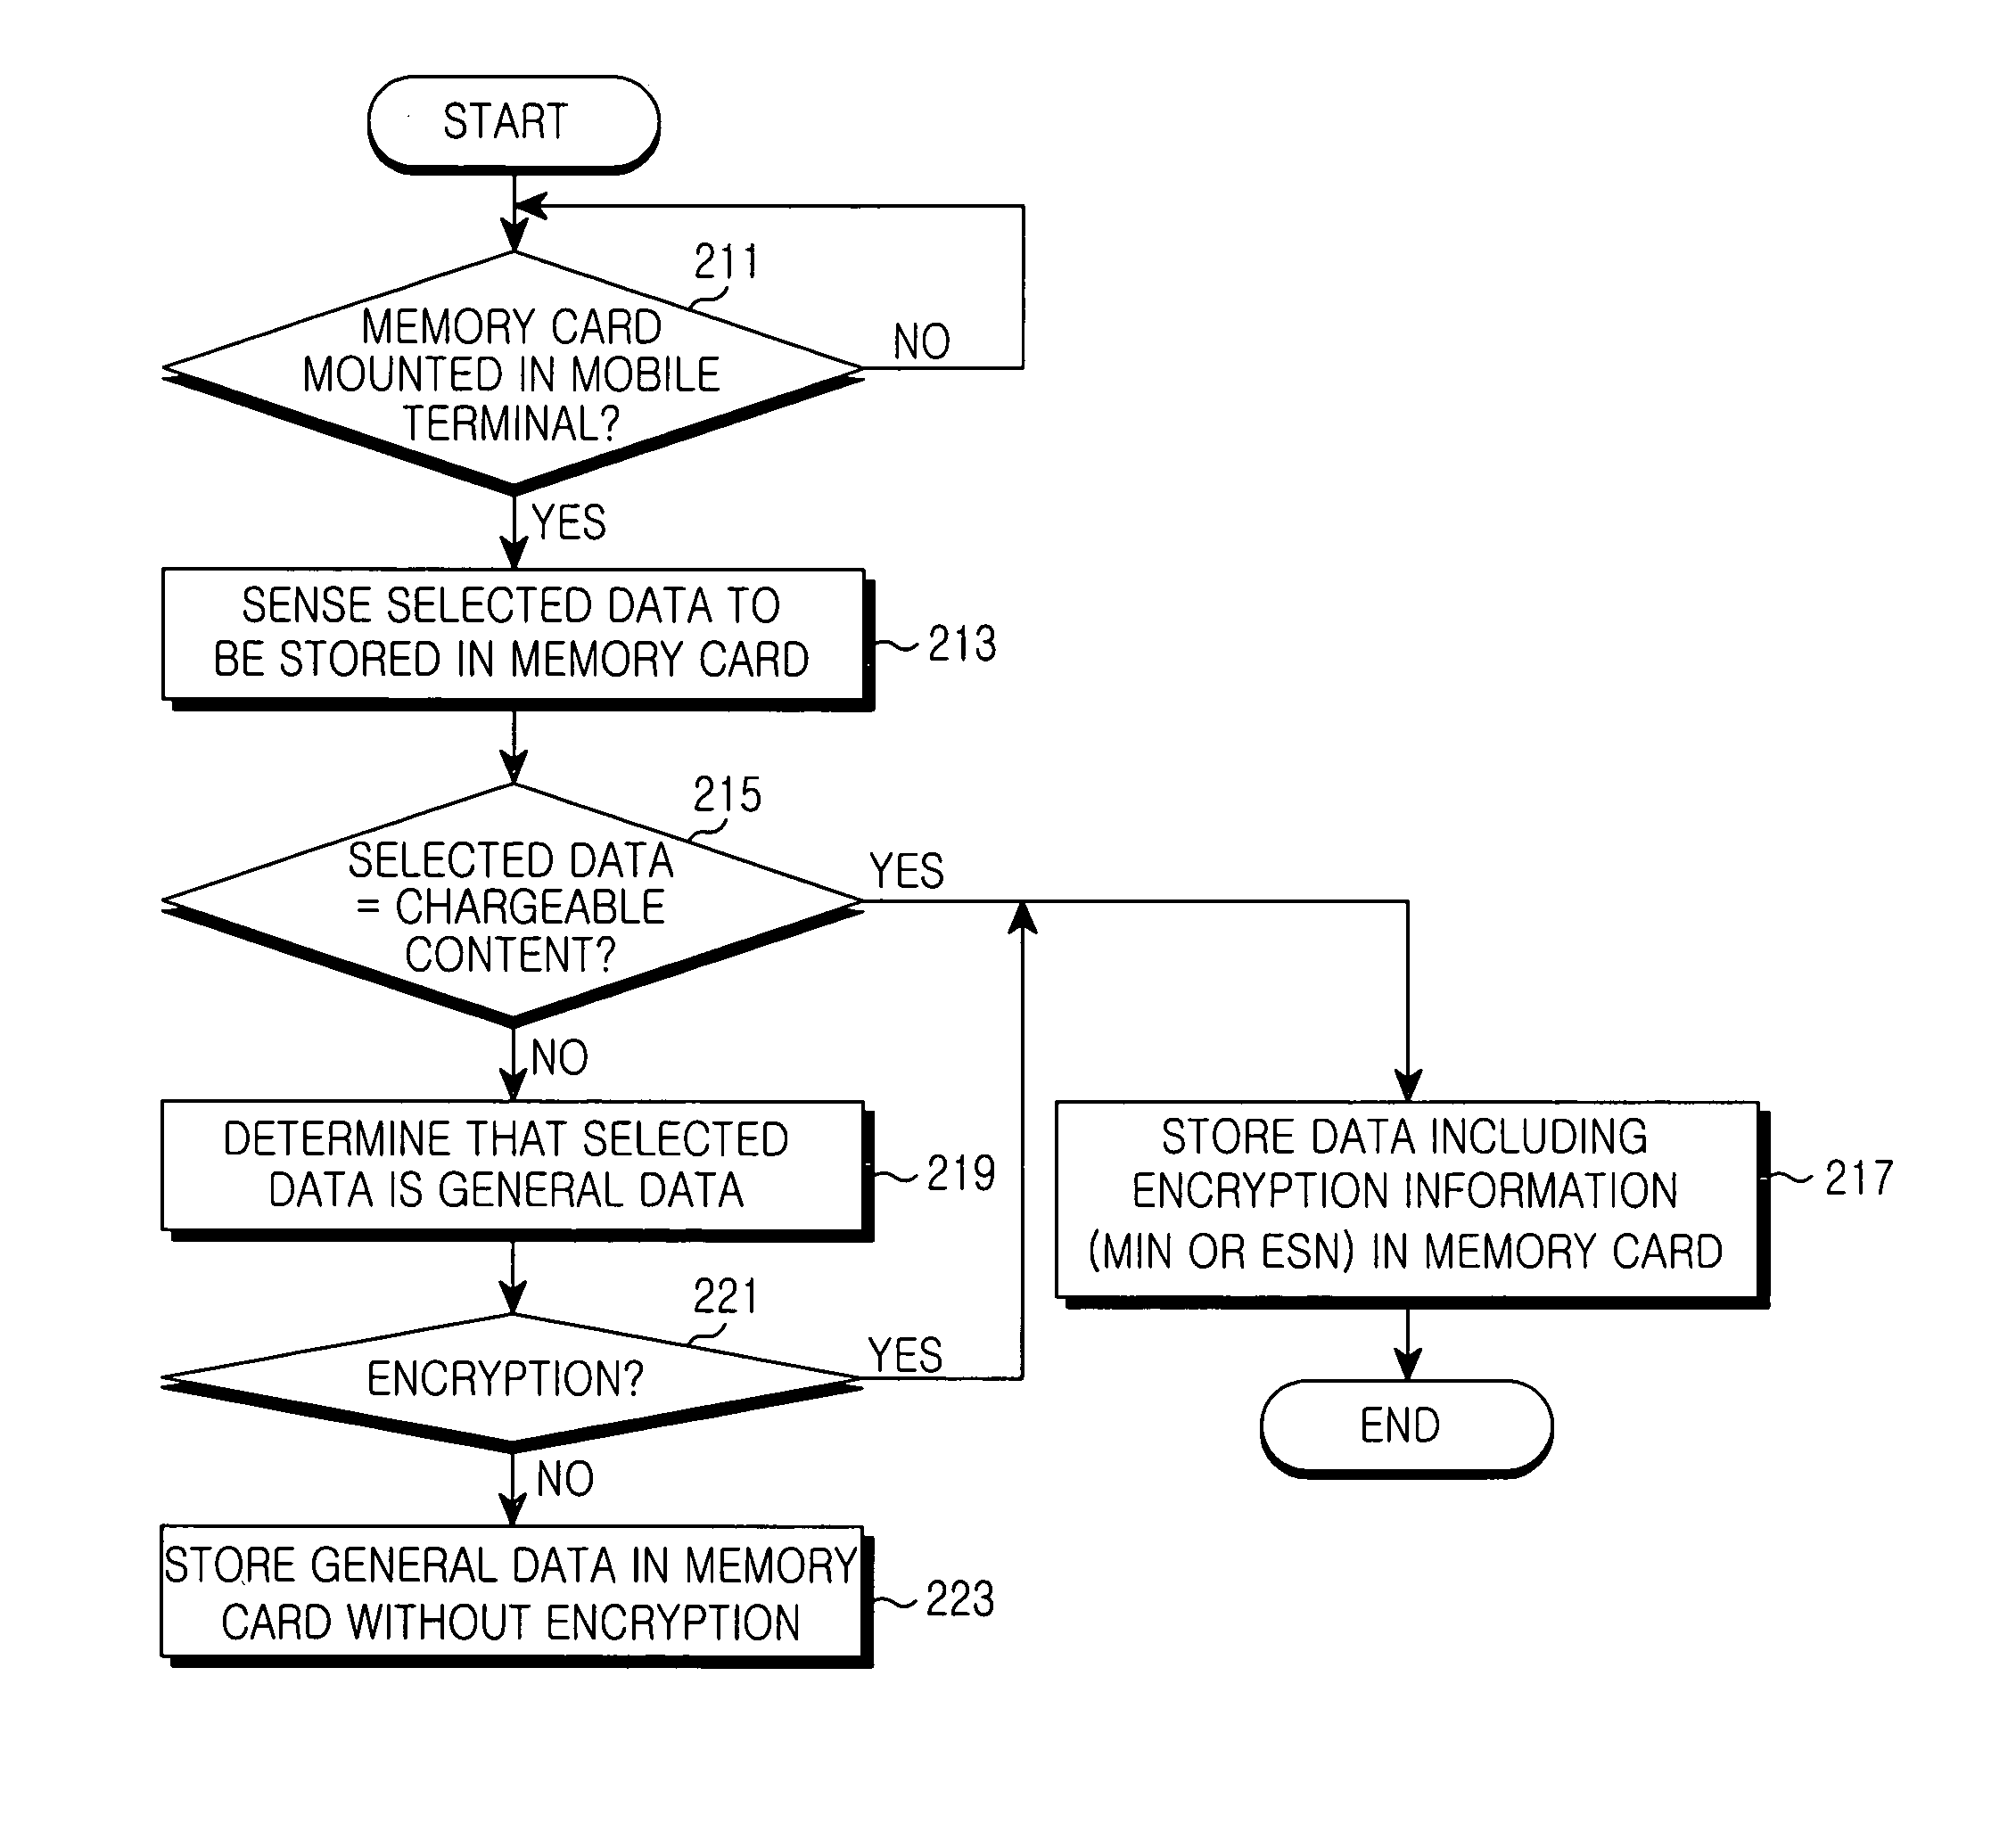 Method of exchanging data securely between a mobile terminal and a memory card